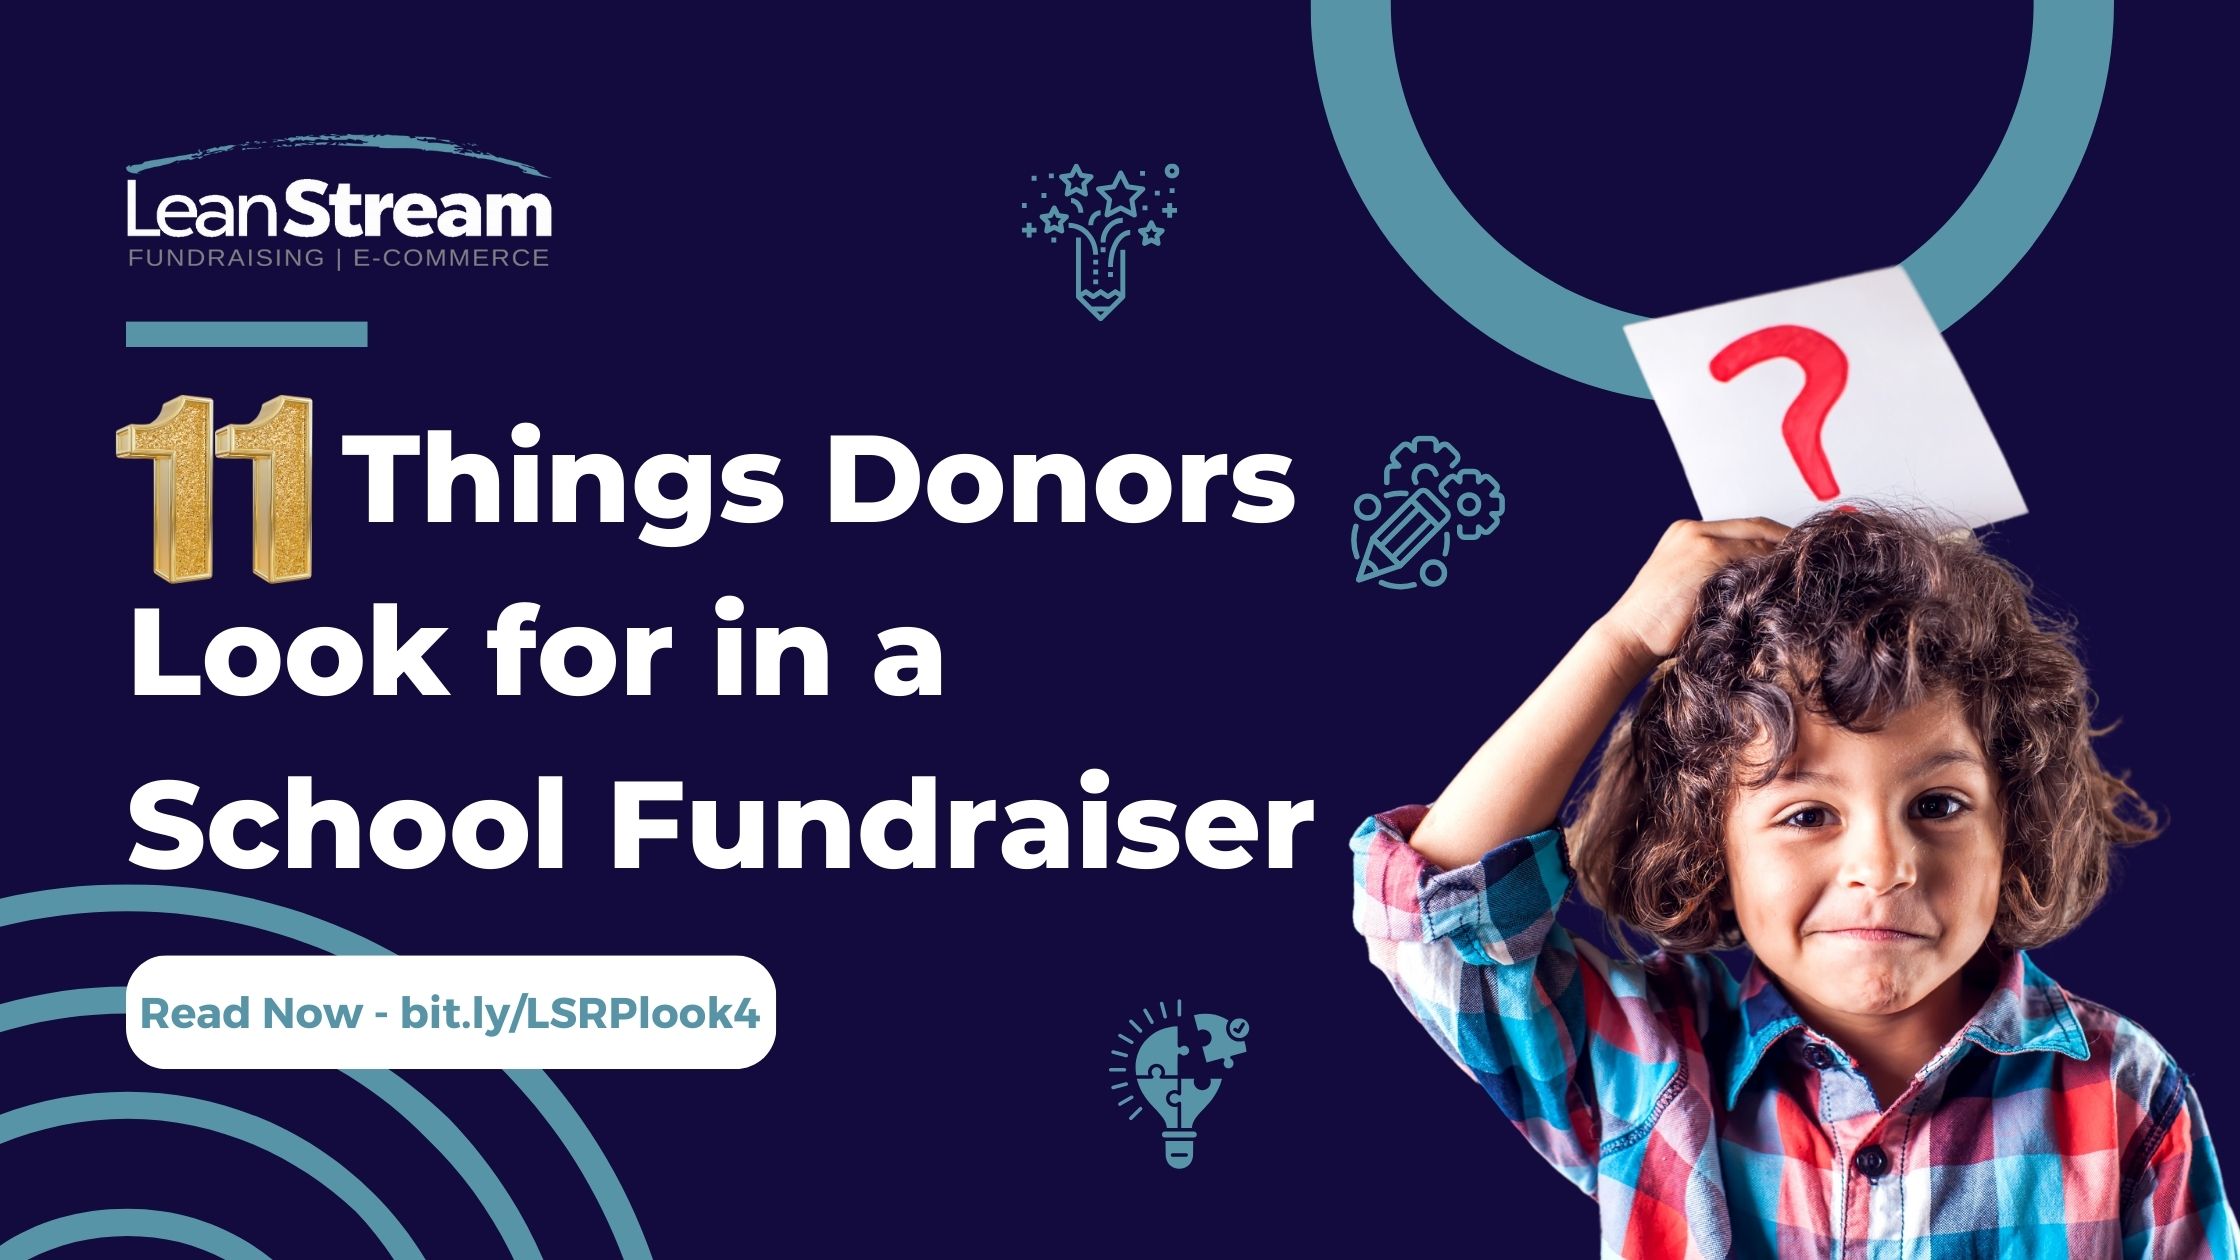 LeanStream Insights Blog Post - 11 Things Donors Look for in a School Fundraiser